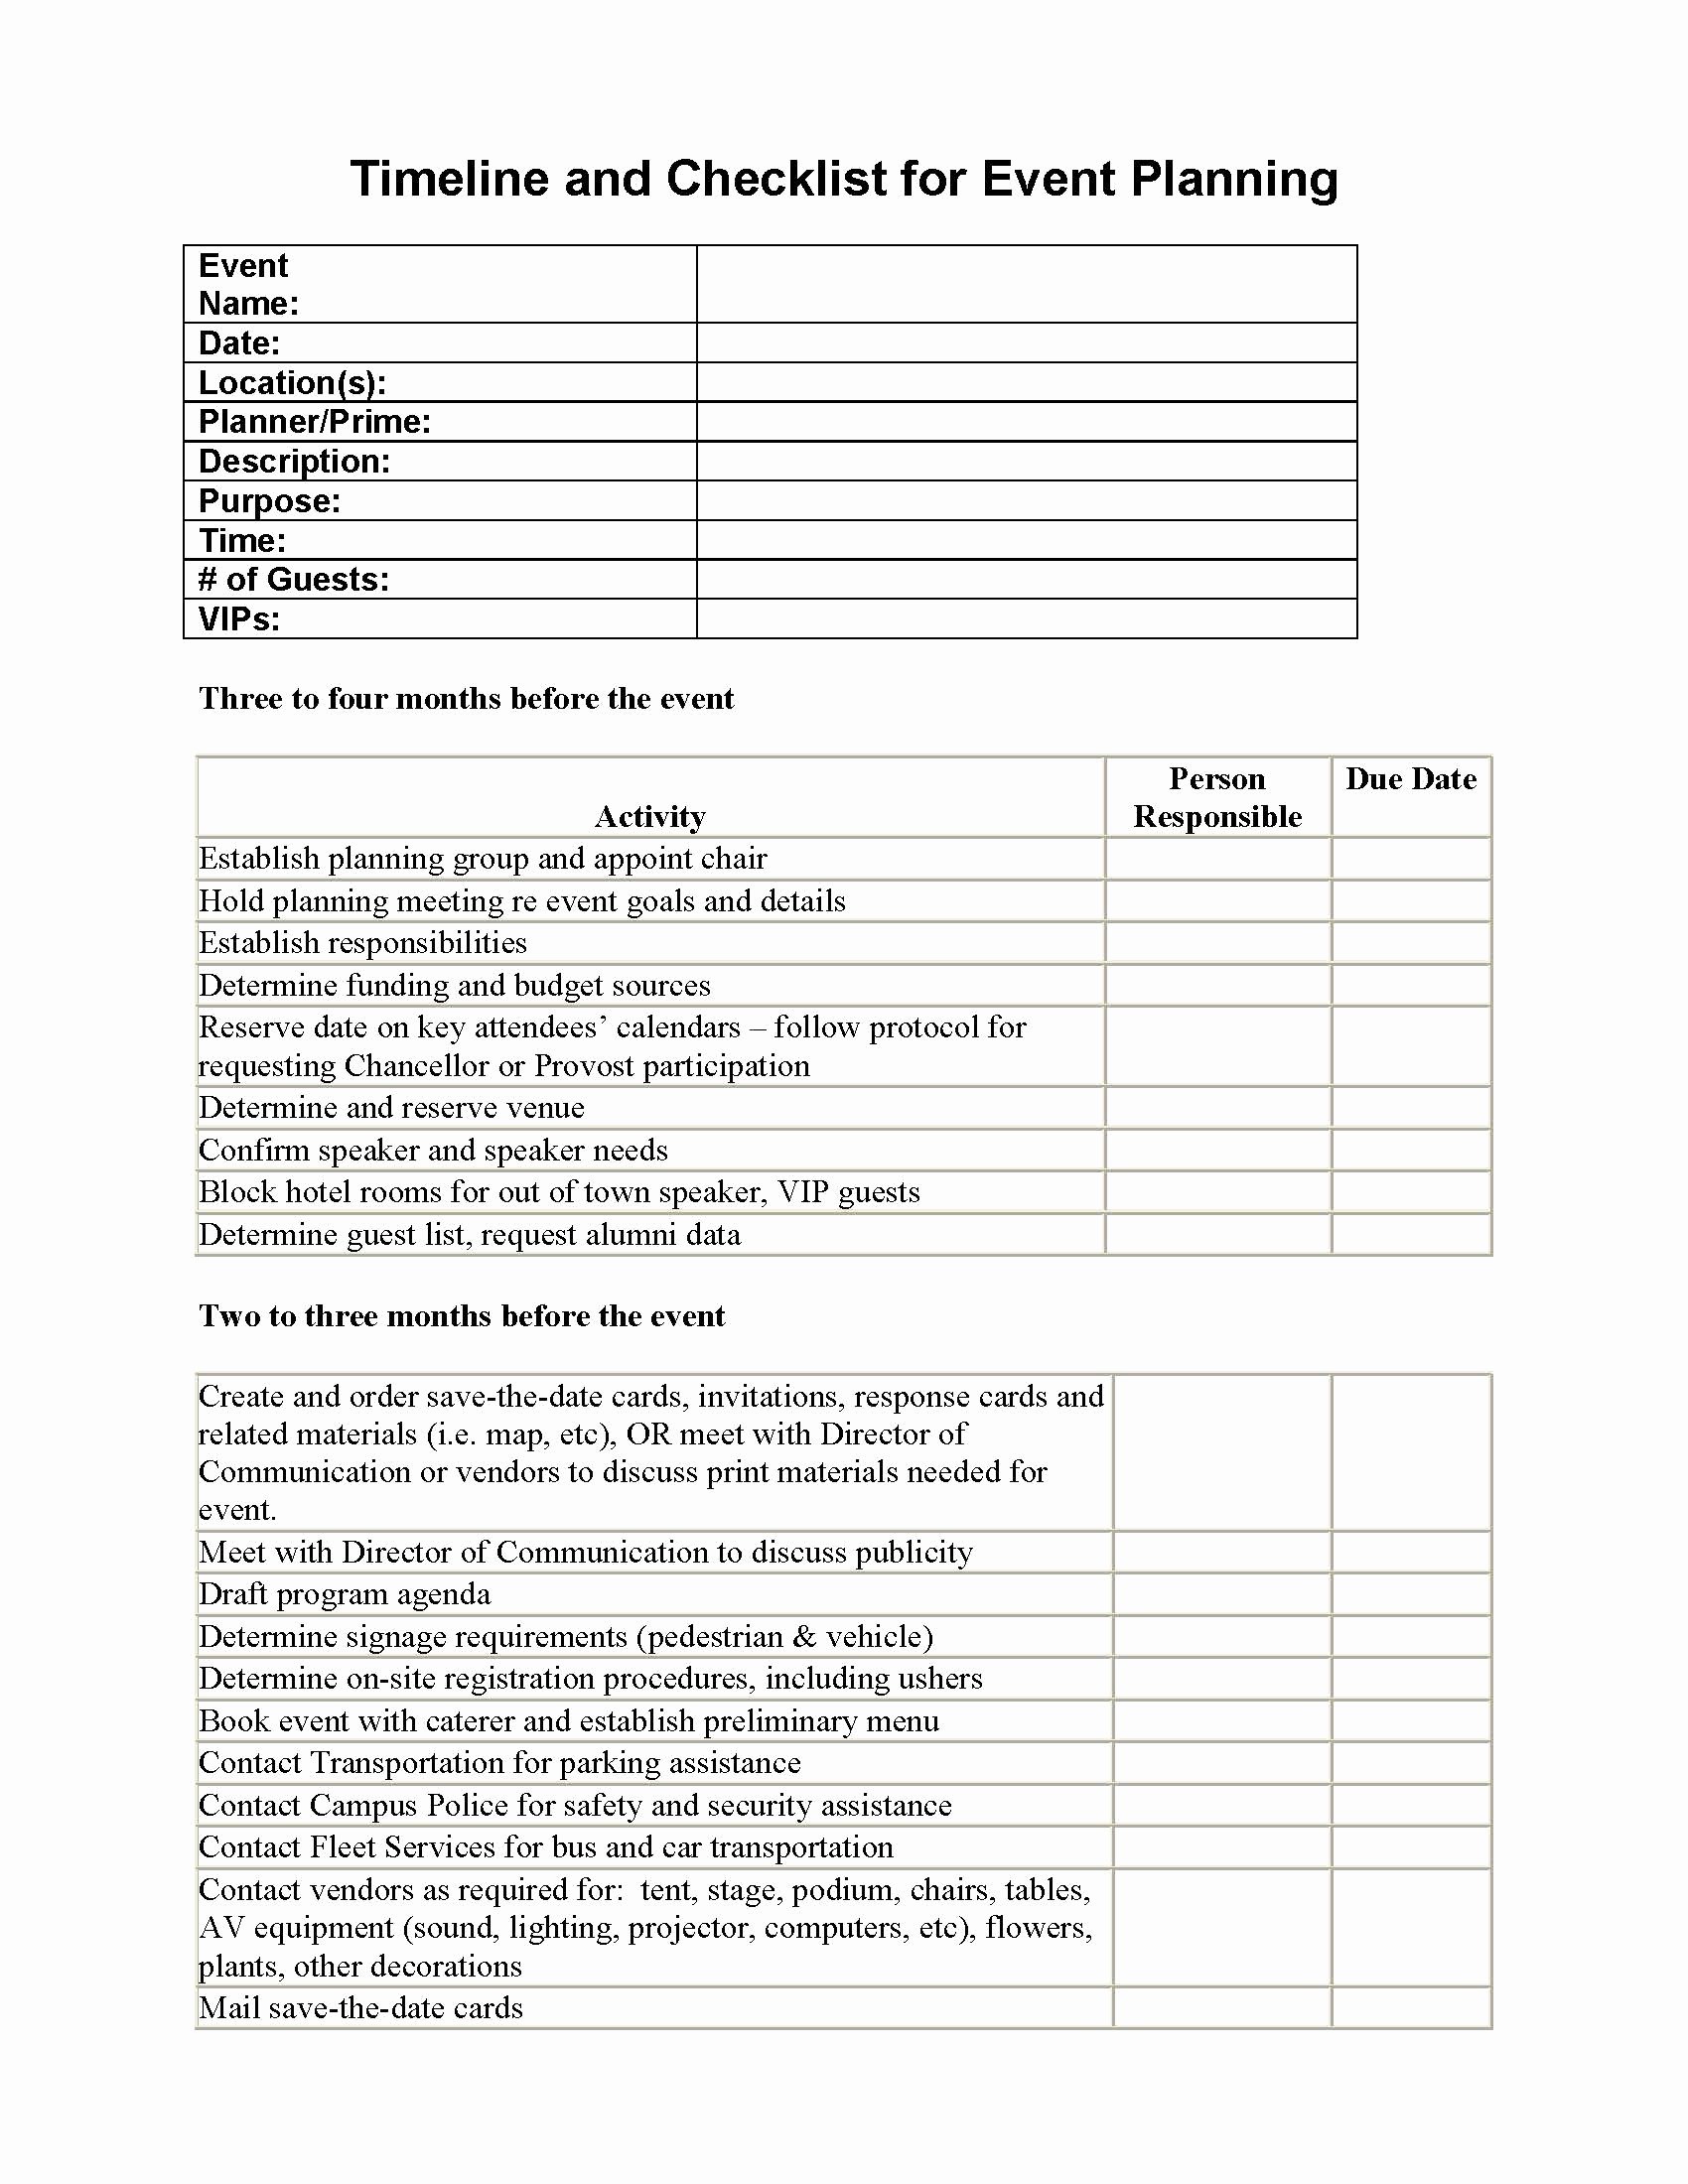 Event Planning Template Pdf Fresh event Planning Timeline and Checklist Template Pdf